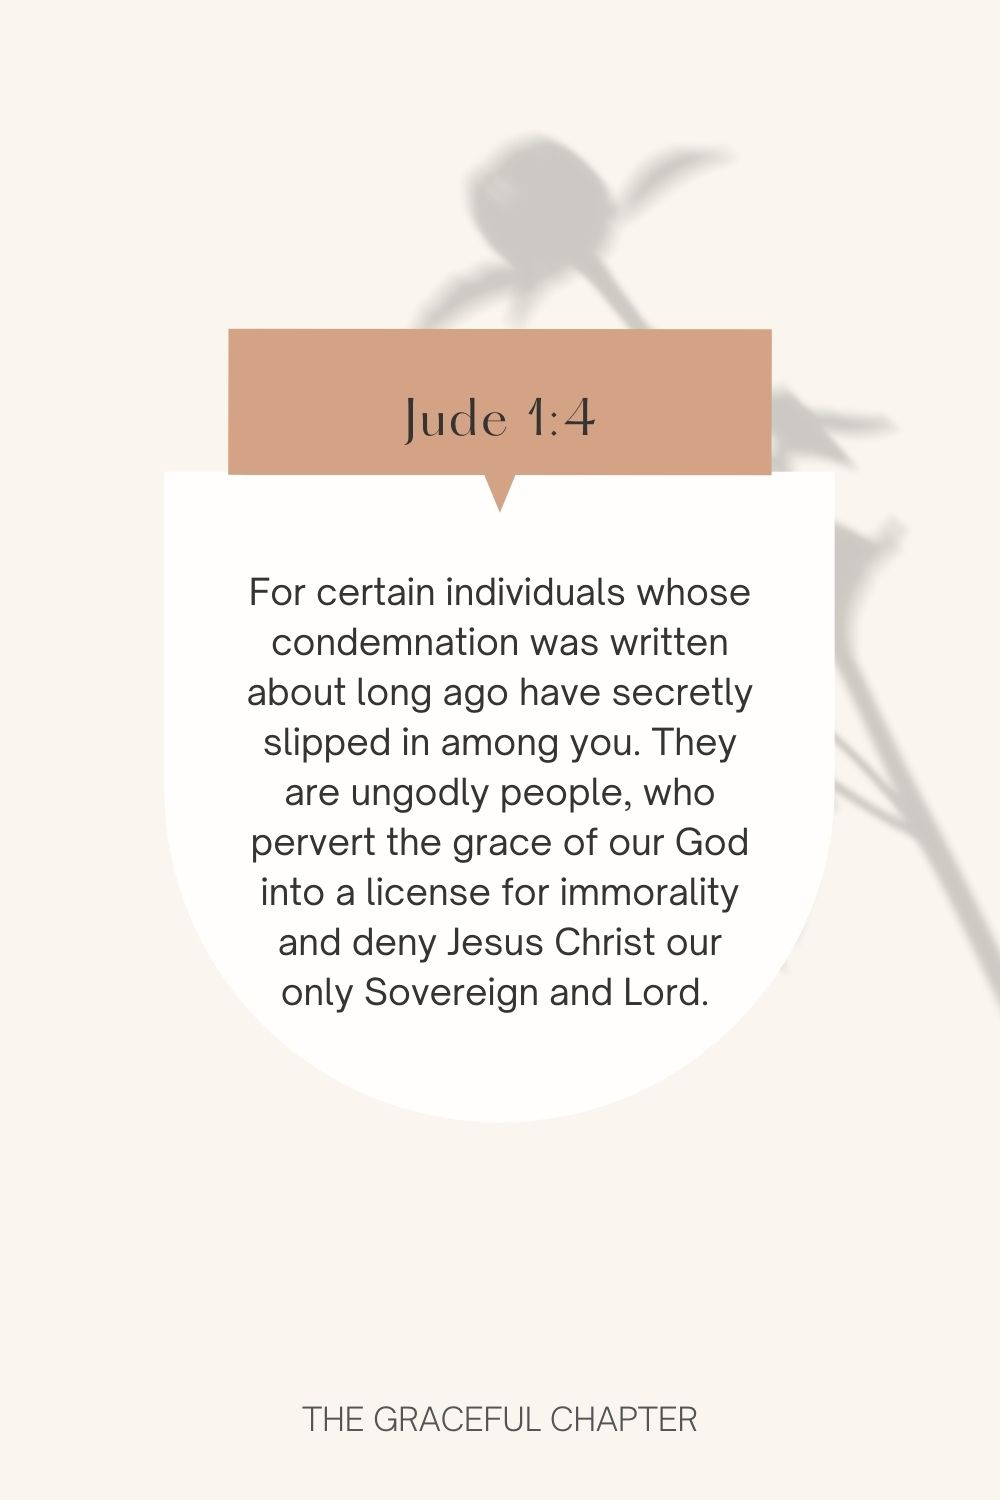 For certain individuals whose condemnation was written about long ago have secretly slipped in among you. They are ungodly people, who pervert the grace of our God into a license for immorality and deny Jesus Christ our only Sovereign and Lord.  Jude 1:4